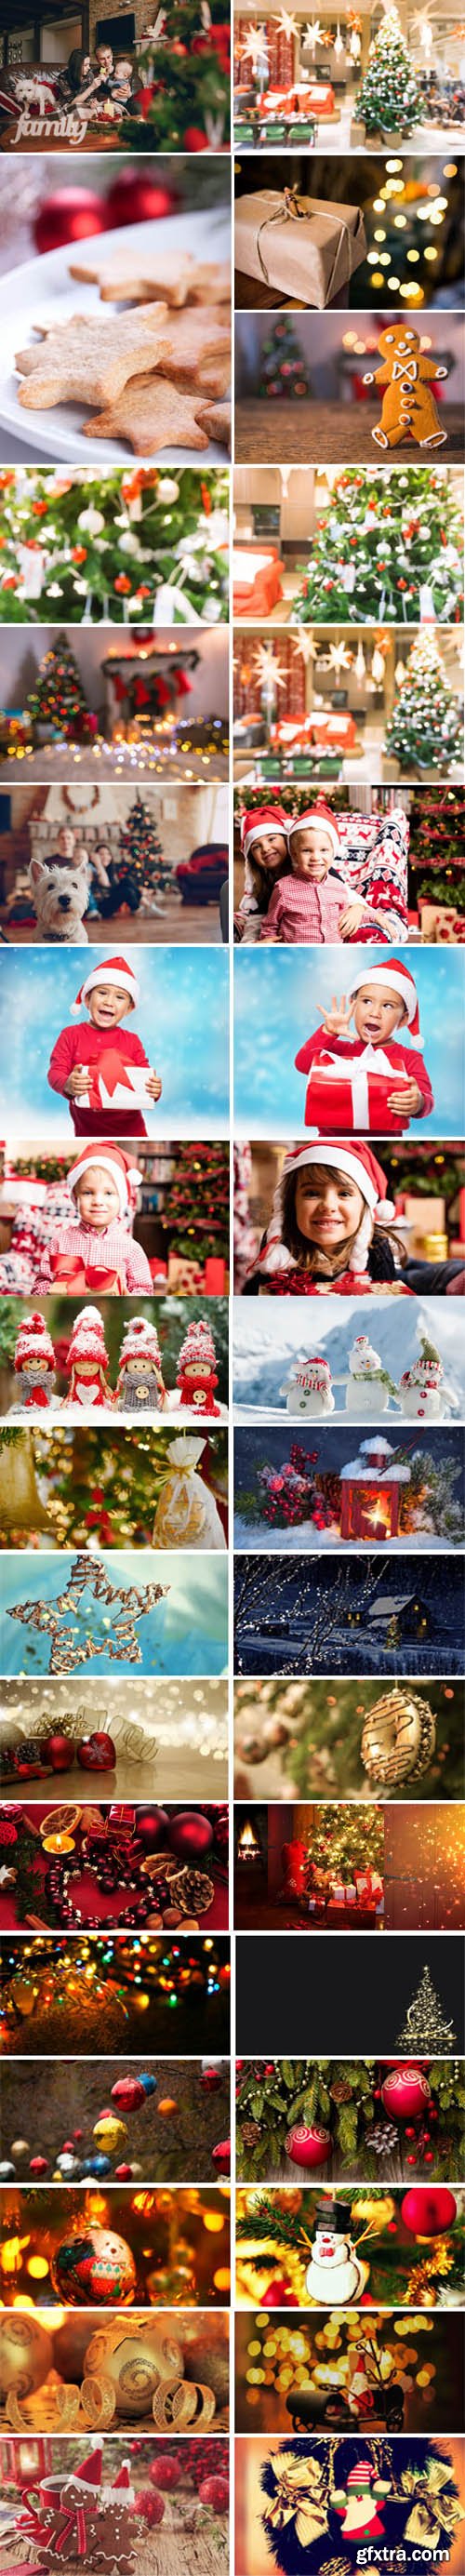 43 Christmas & New Year Photos & Wallpapers Collection 2